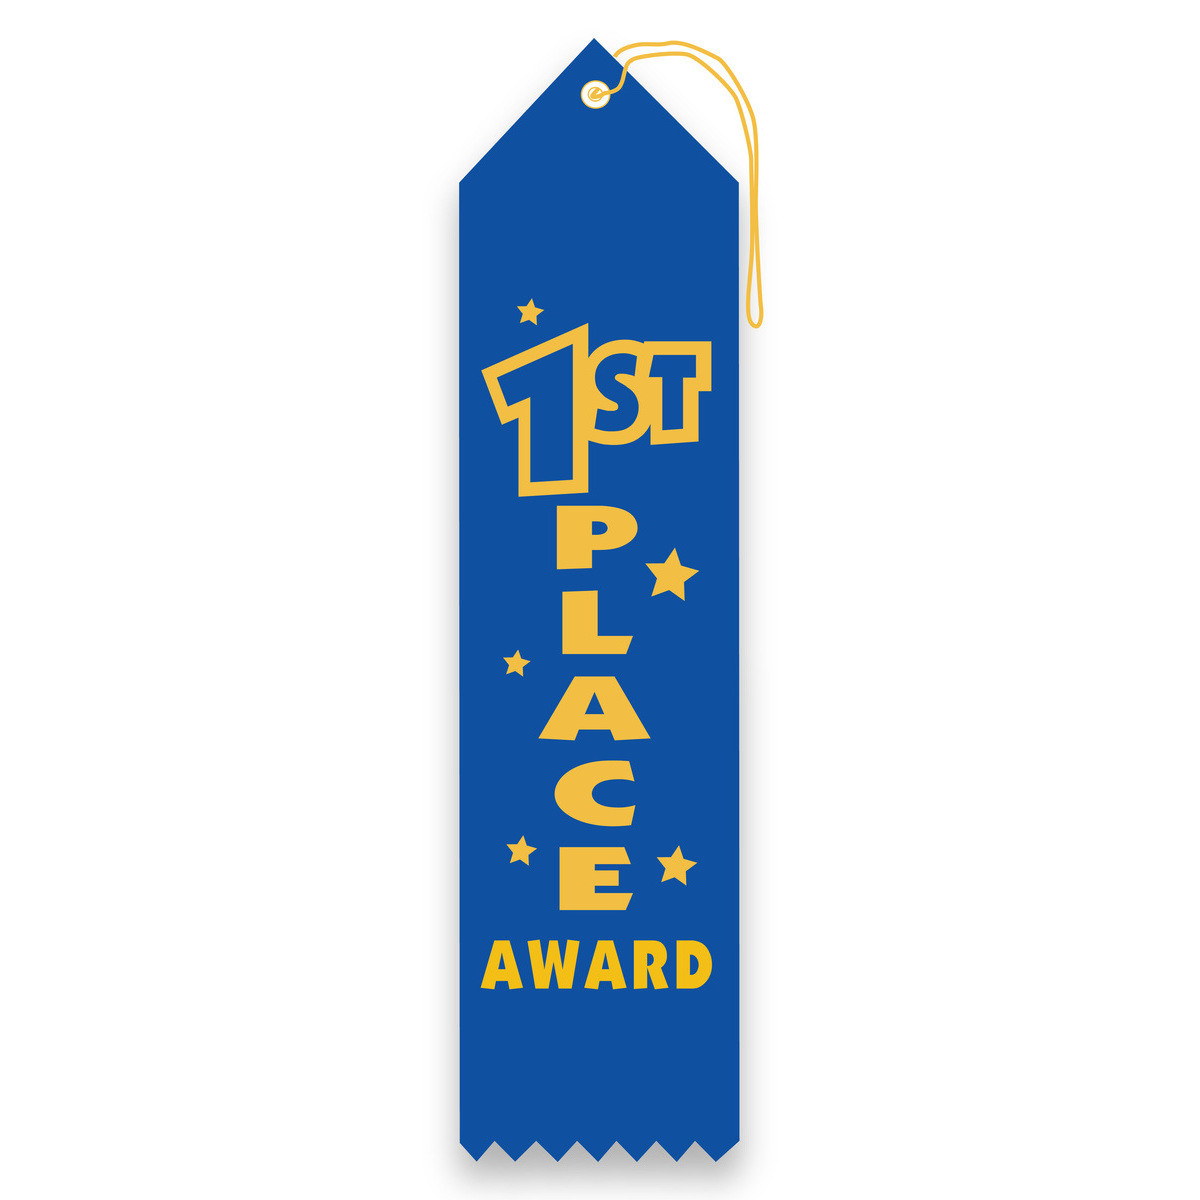 Carded Ribbon - 1st Place Award